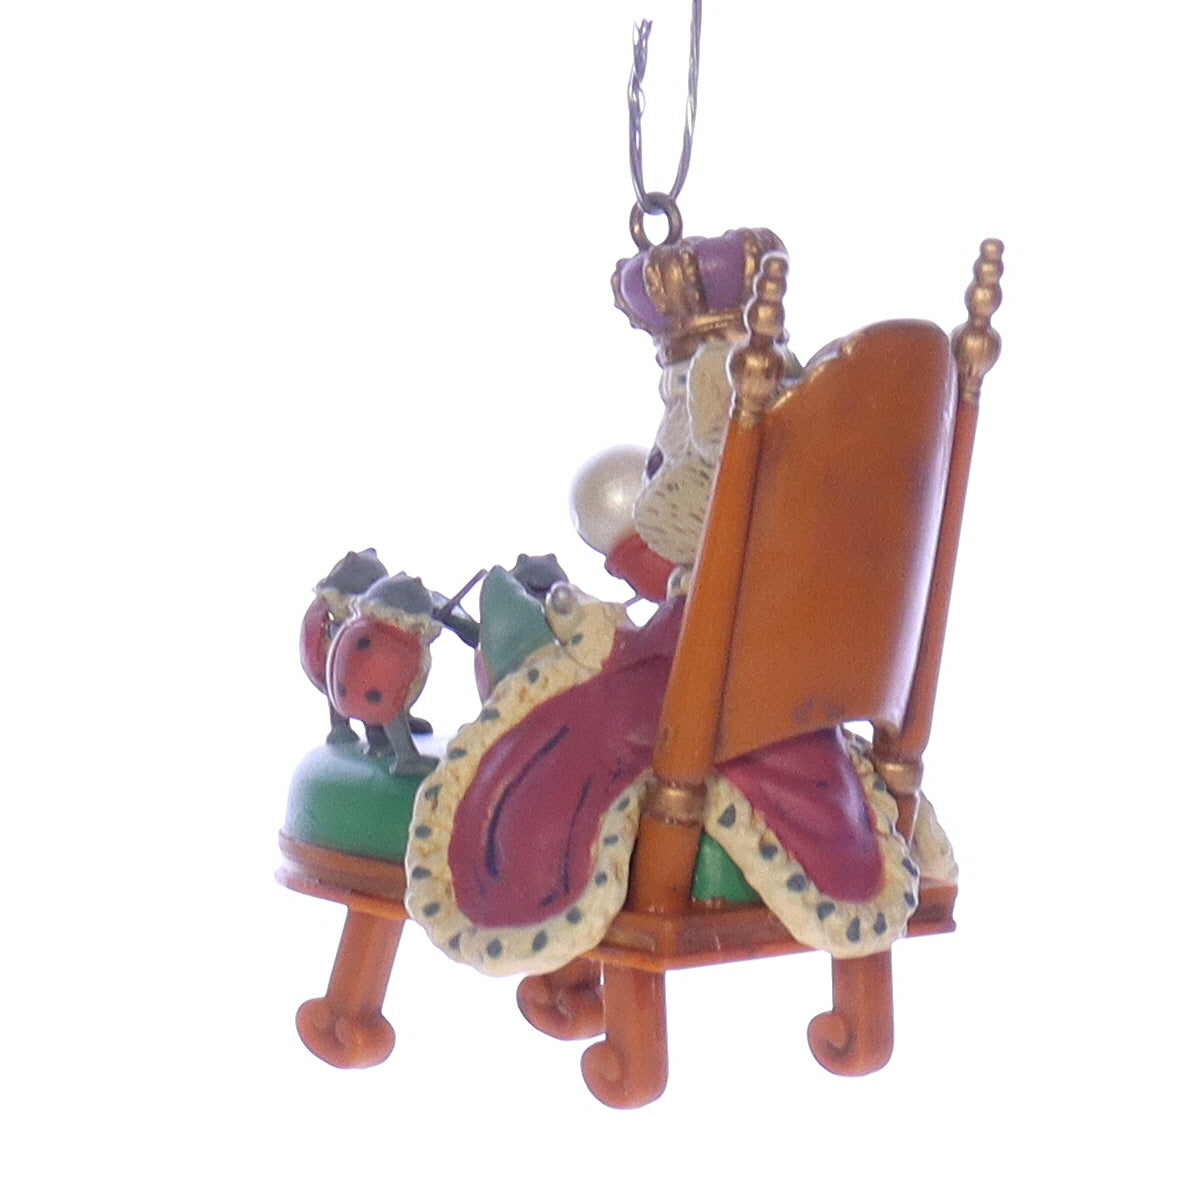 Enesco_Treasury_of_Christmas_Ornaments_575682_Old_King_Cole_Christmas_Ornament_1991 Back Right View